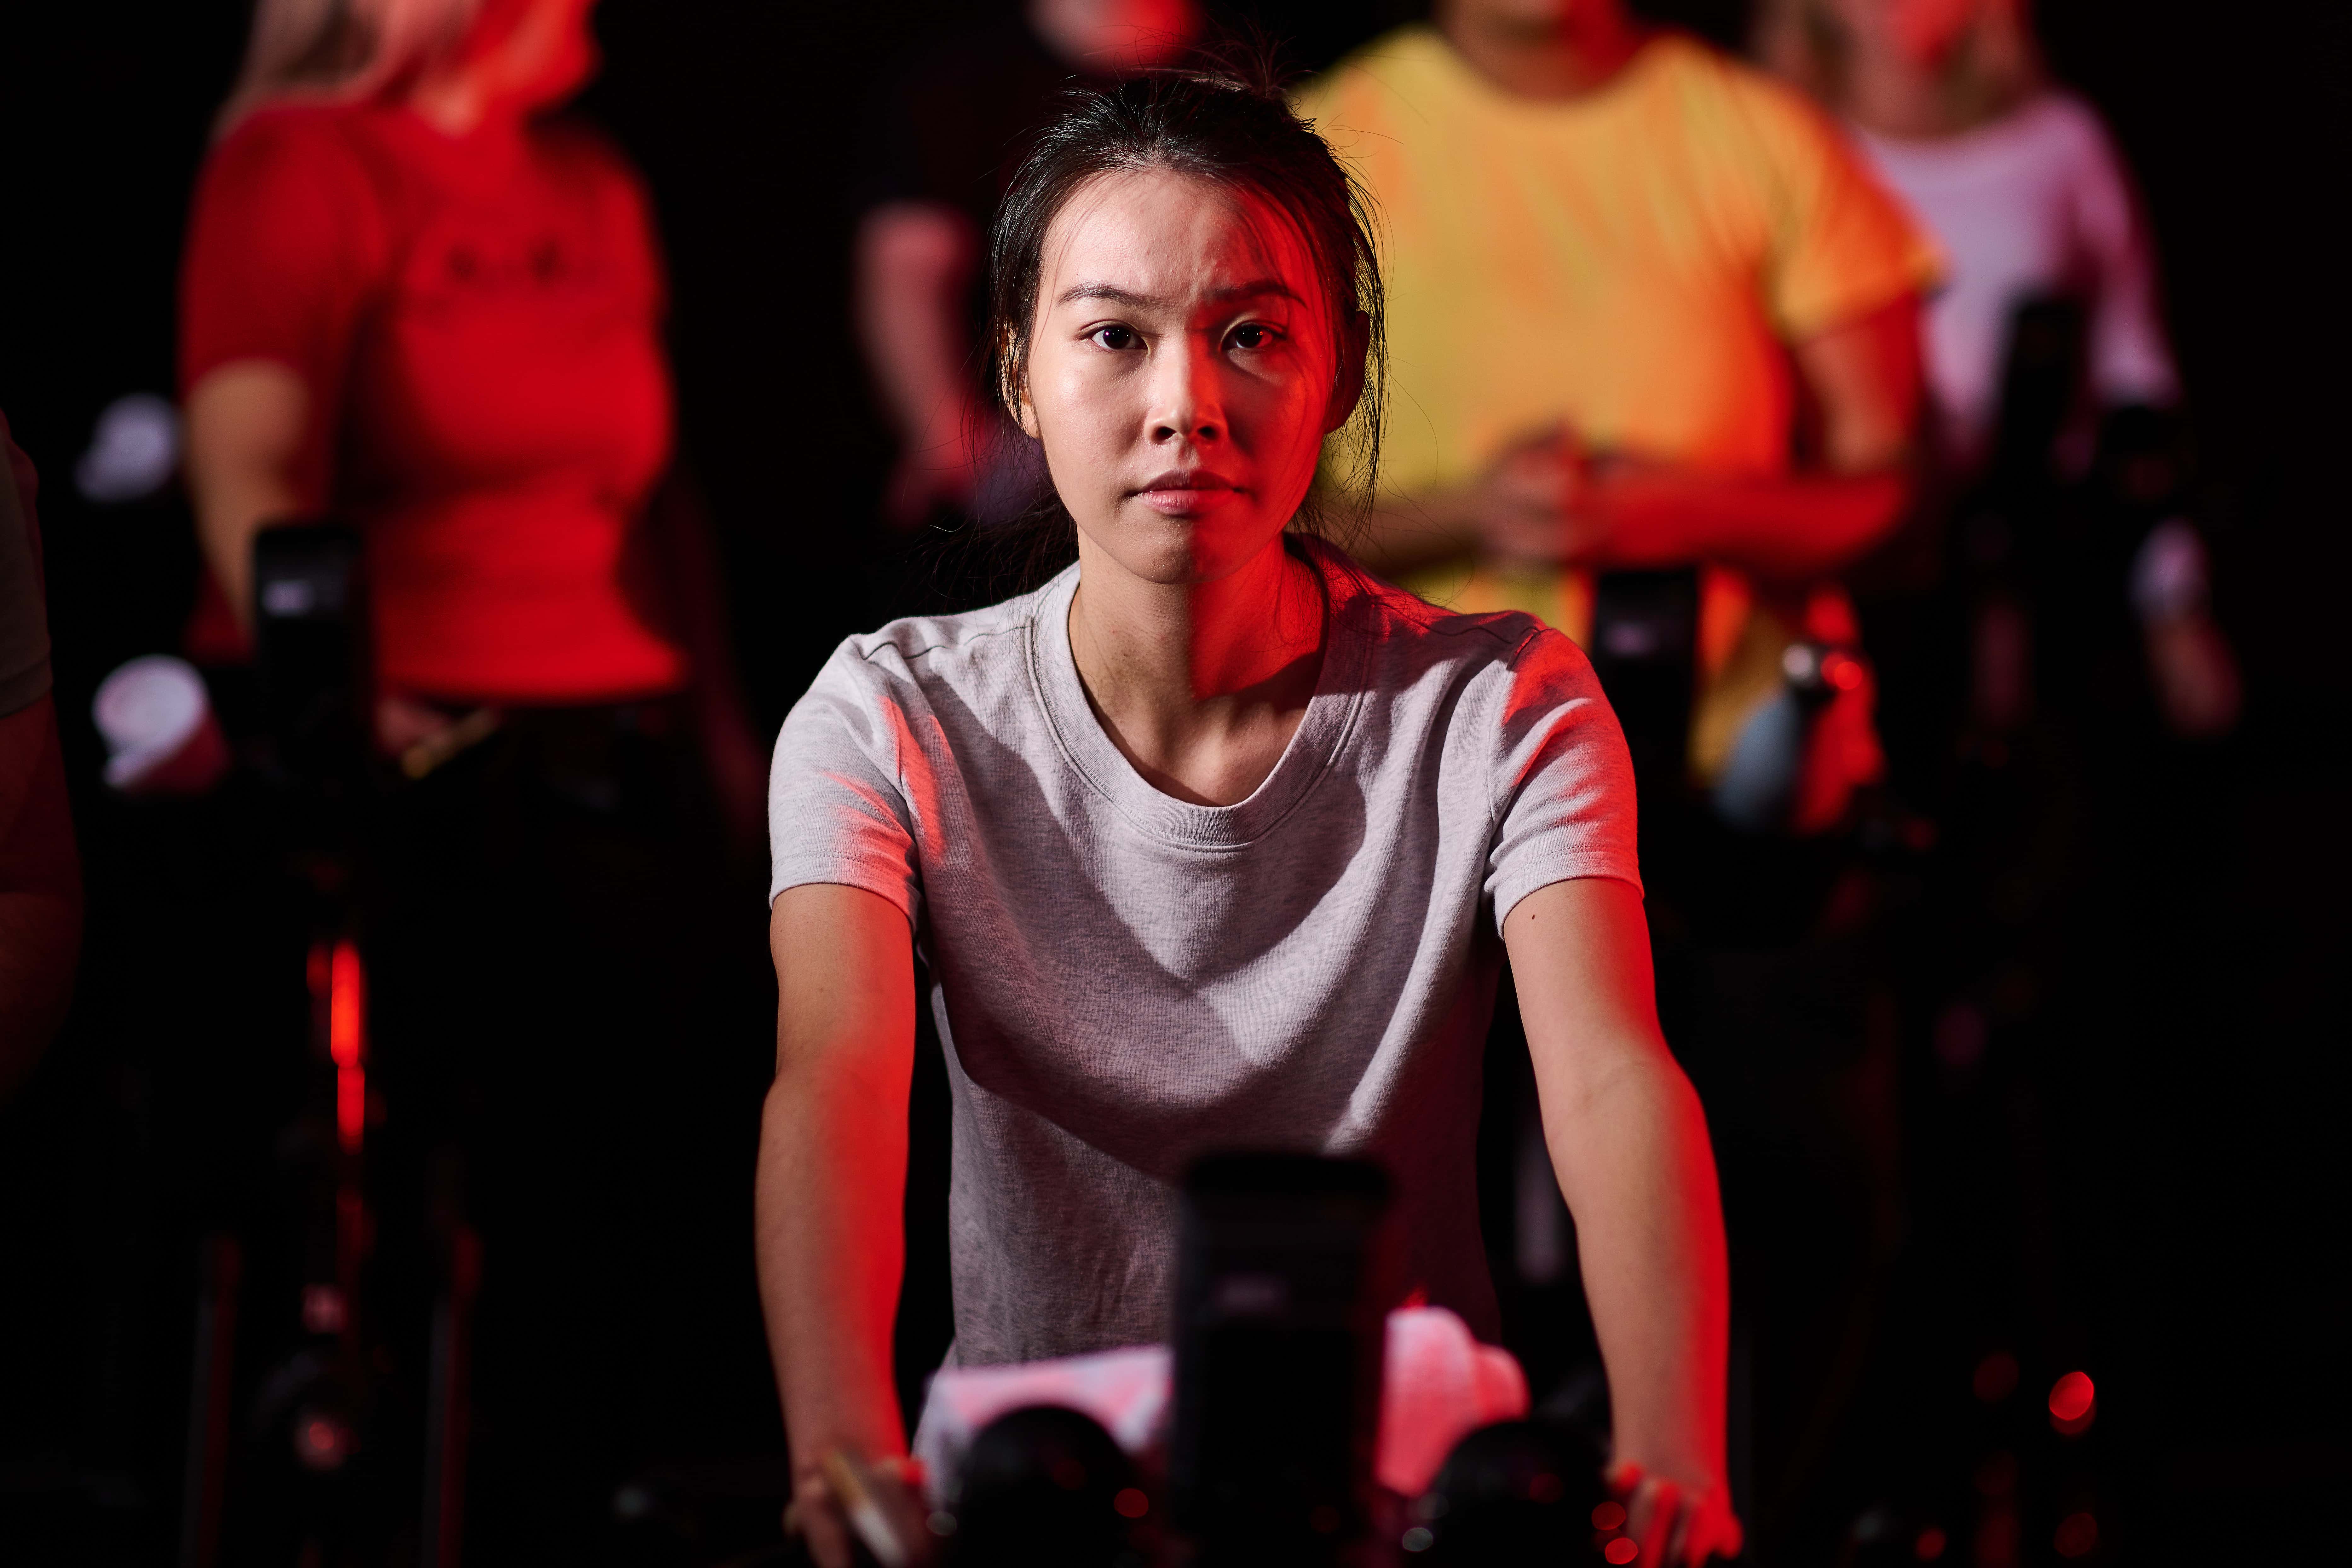 How To Burn More Calories in a Spin Class